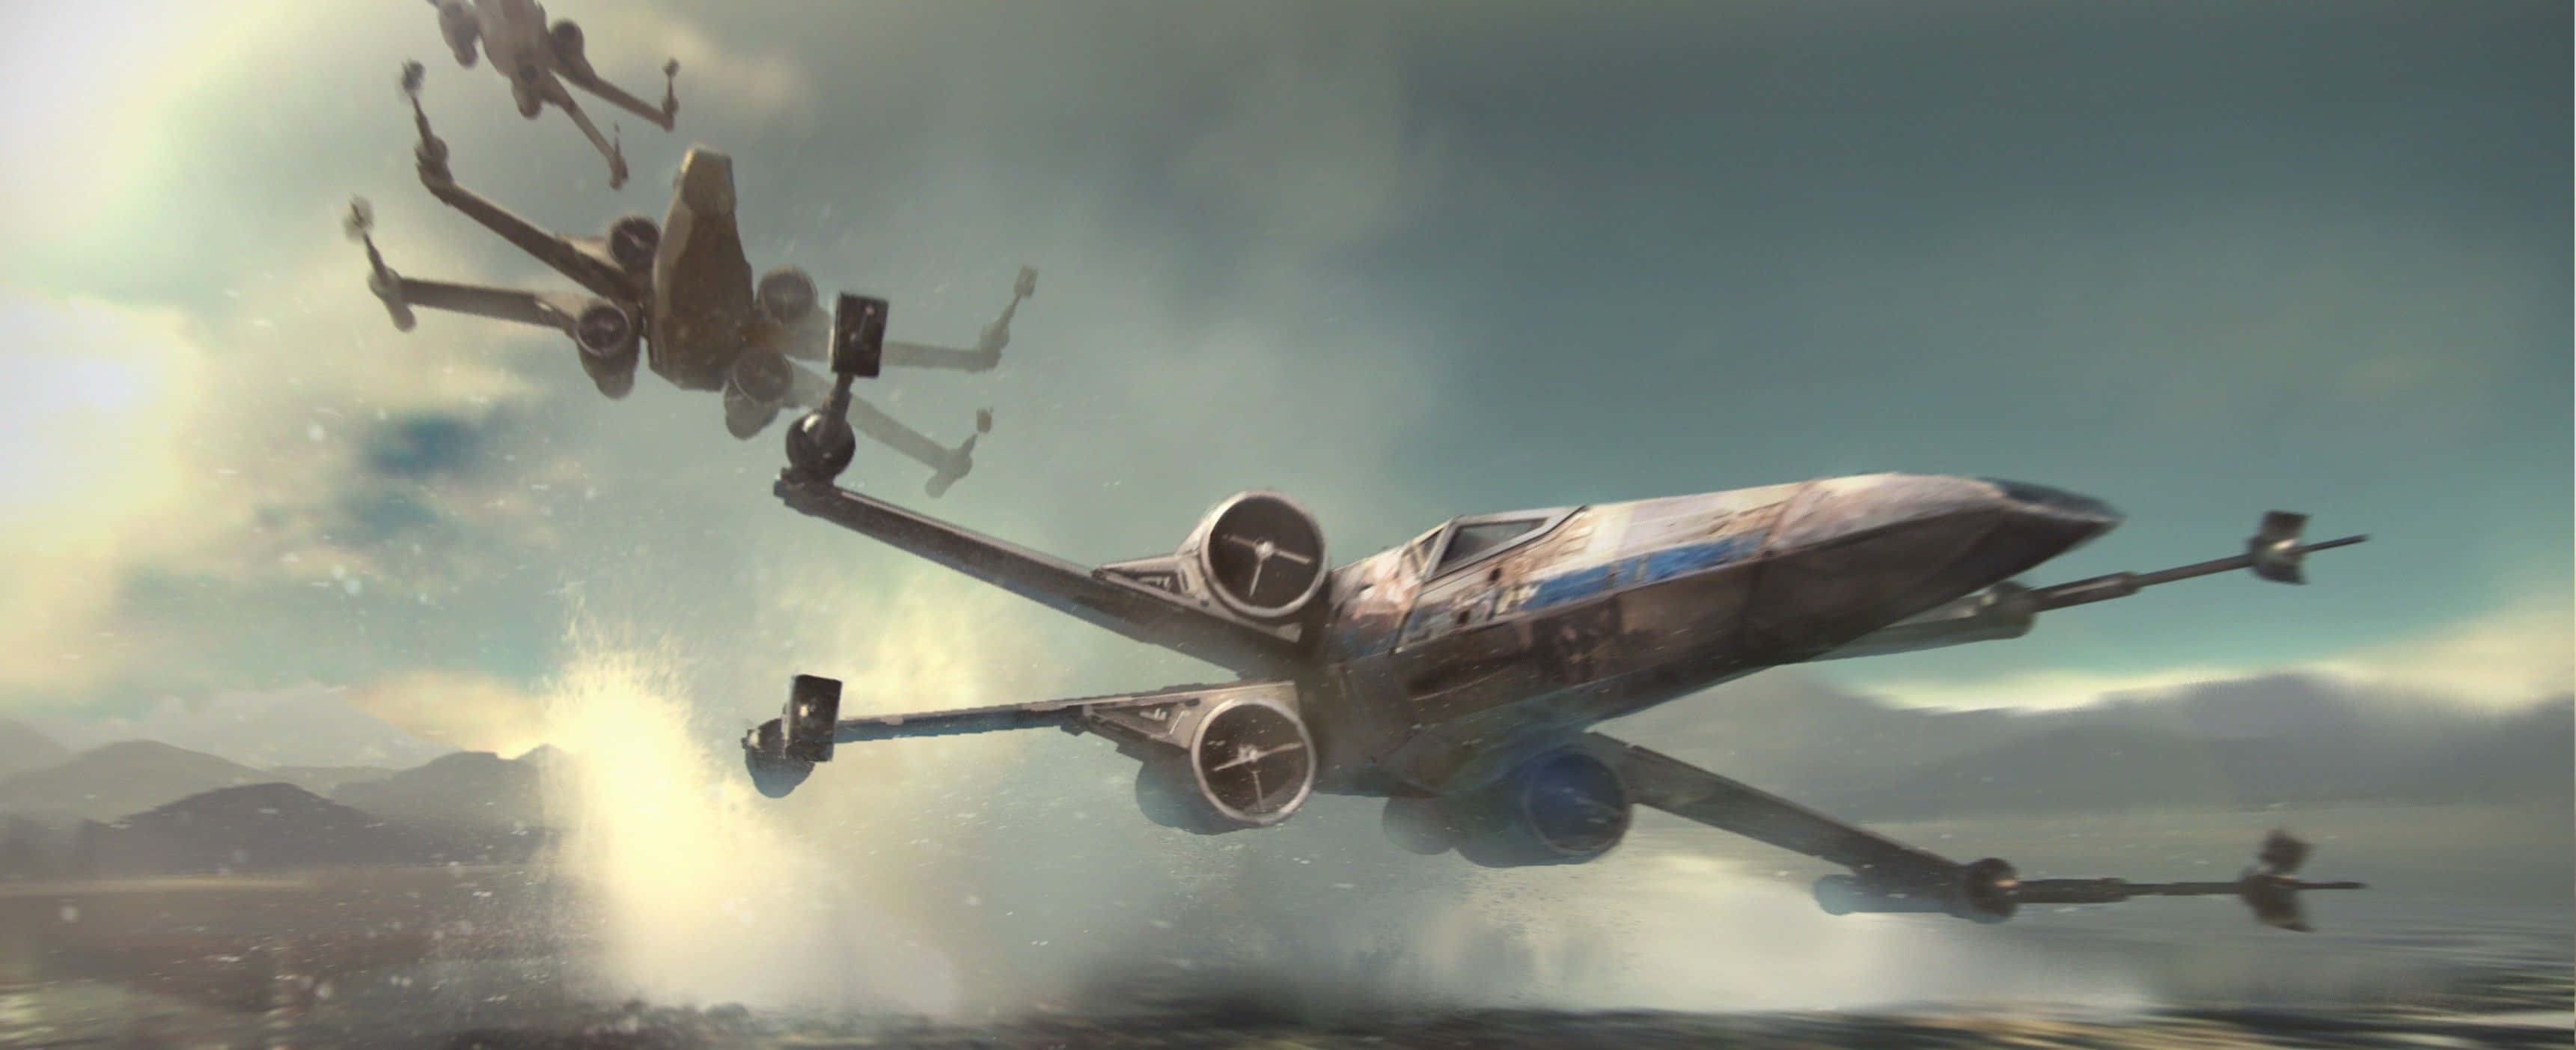 Fast and Furious X-Wing Fighter Wallpaper